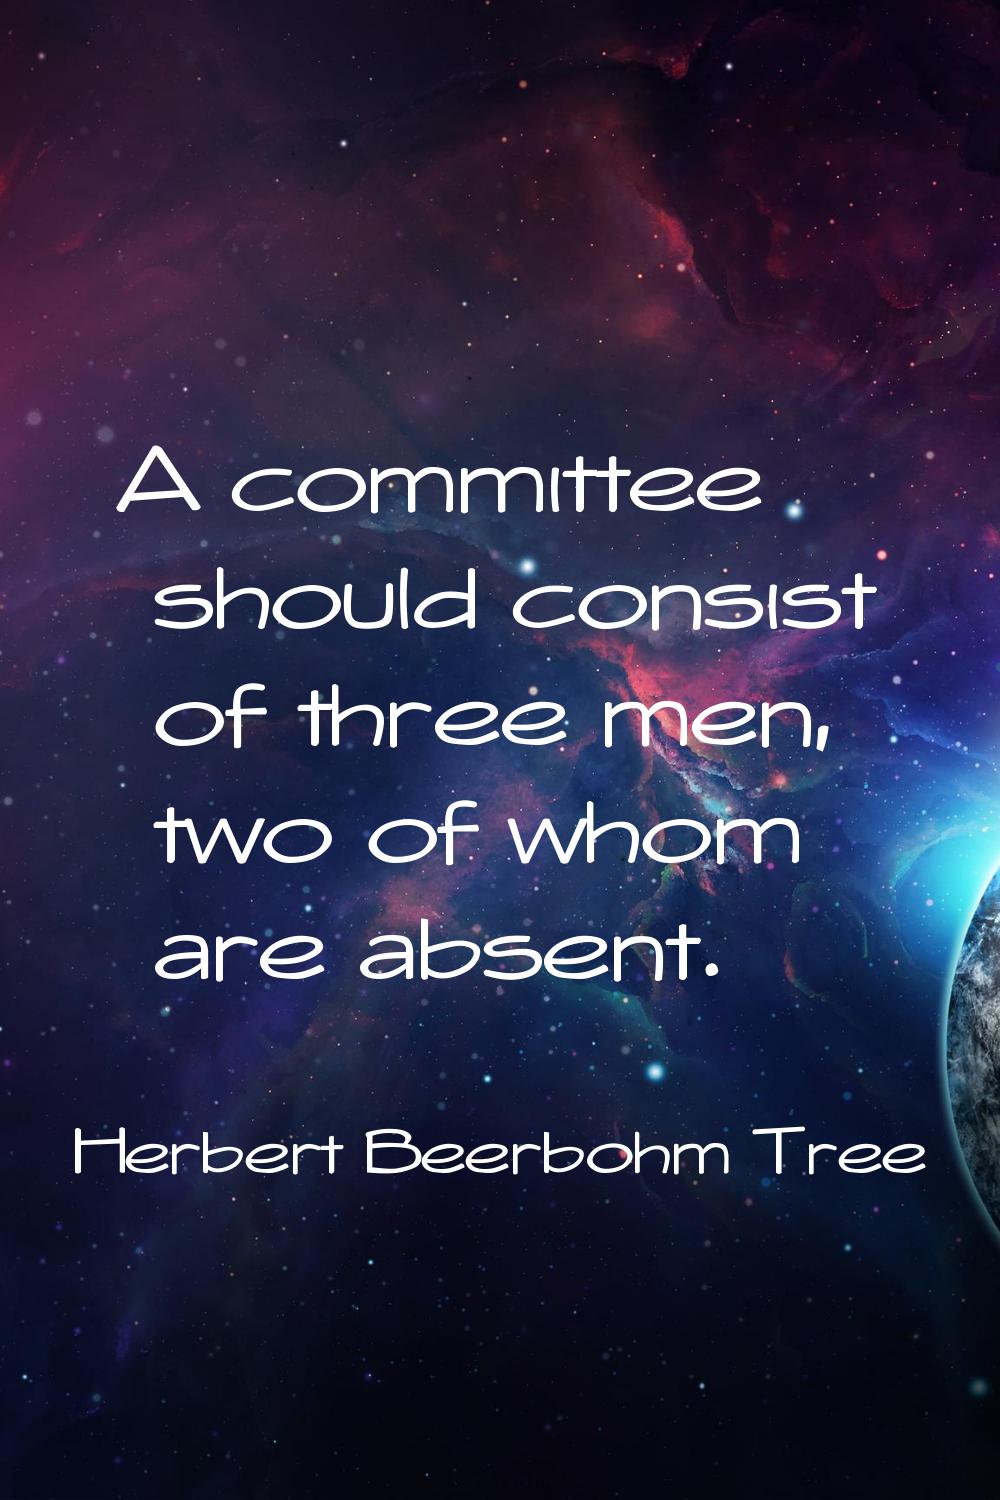 A committee should consist of three men, two of whom are absent.